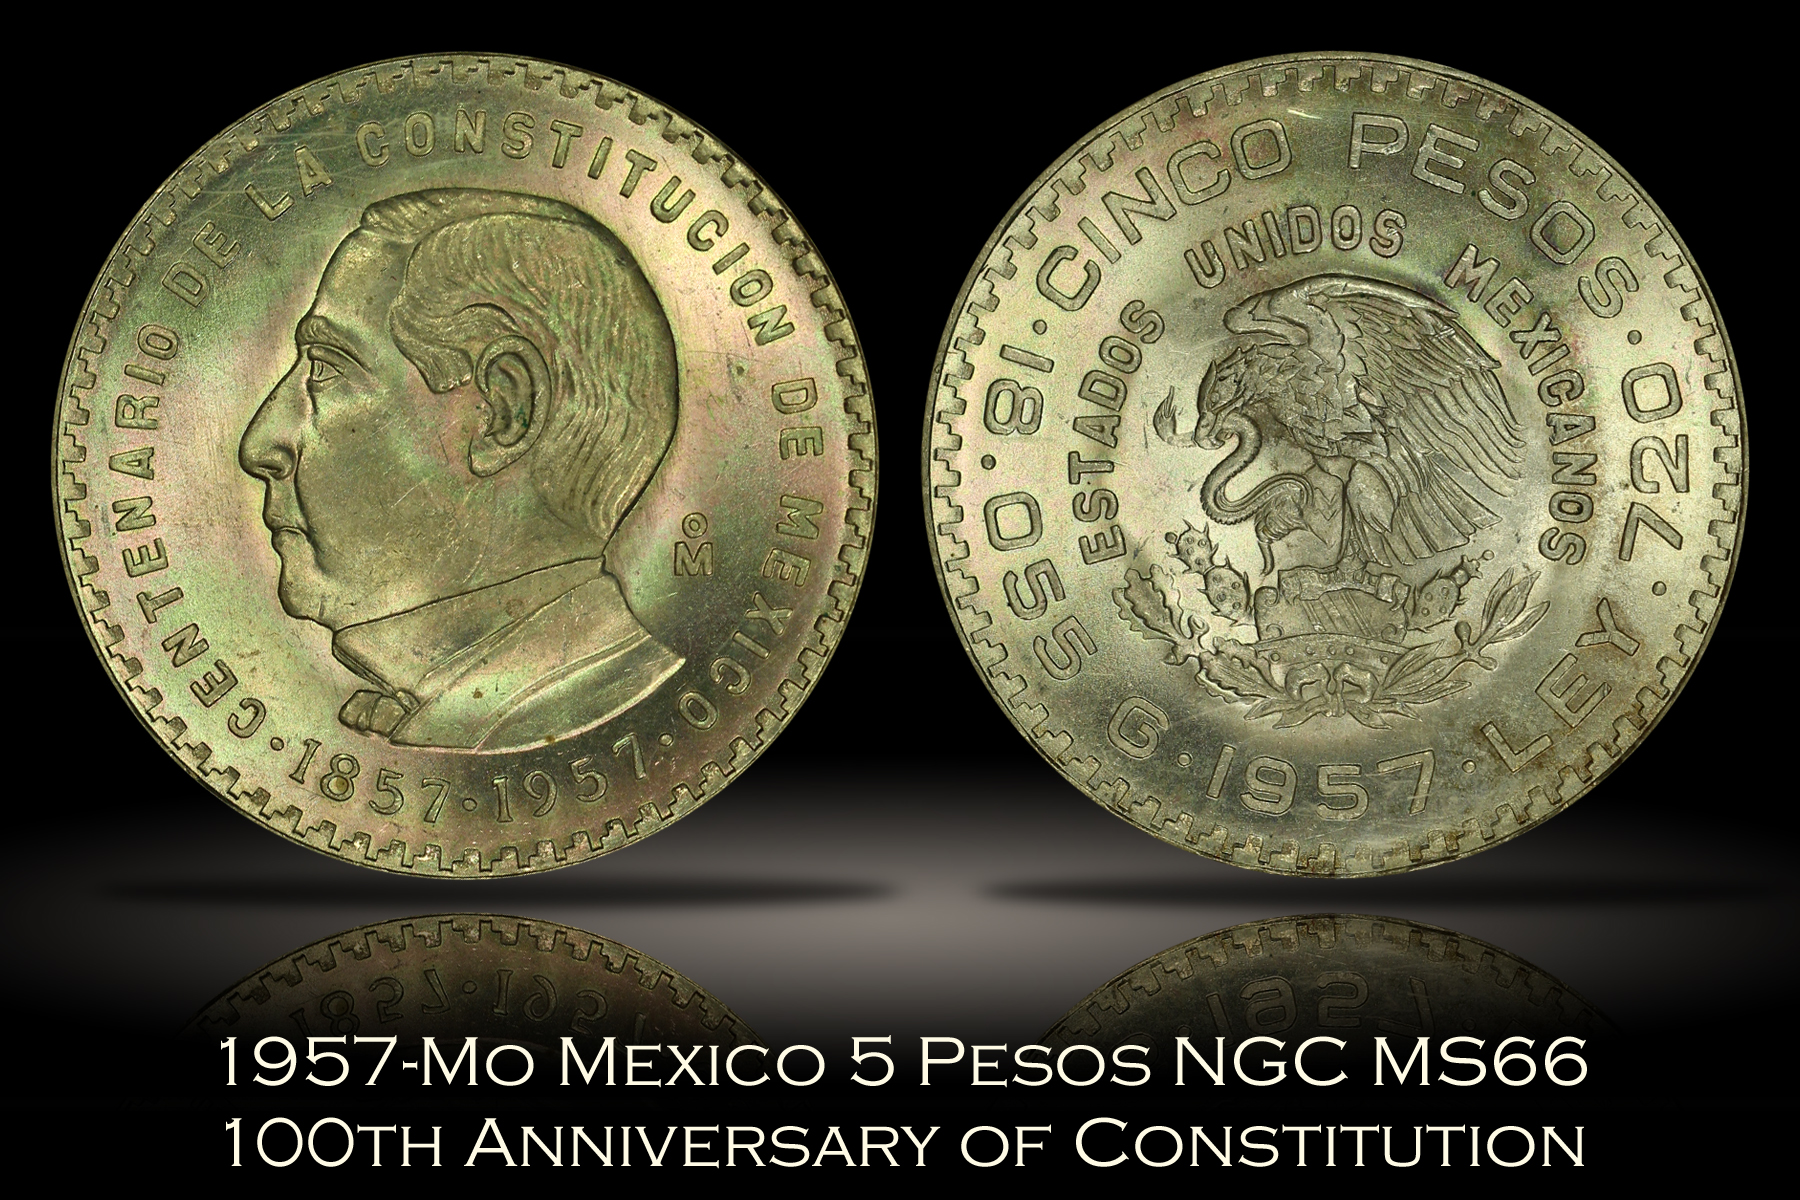 1957-Mo Mexico 5 Pesos 100th Anniversary of Constitution NGC MS66